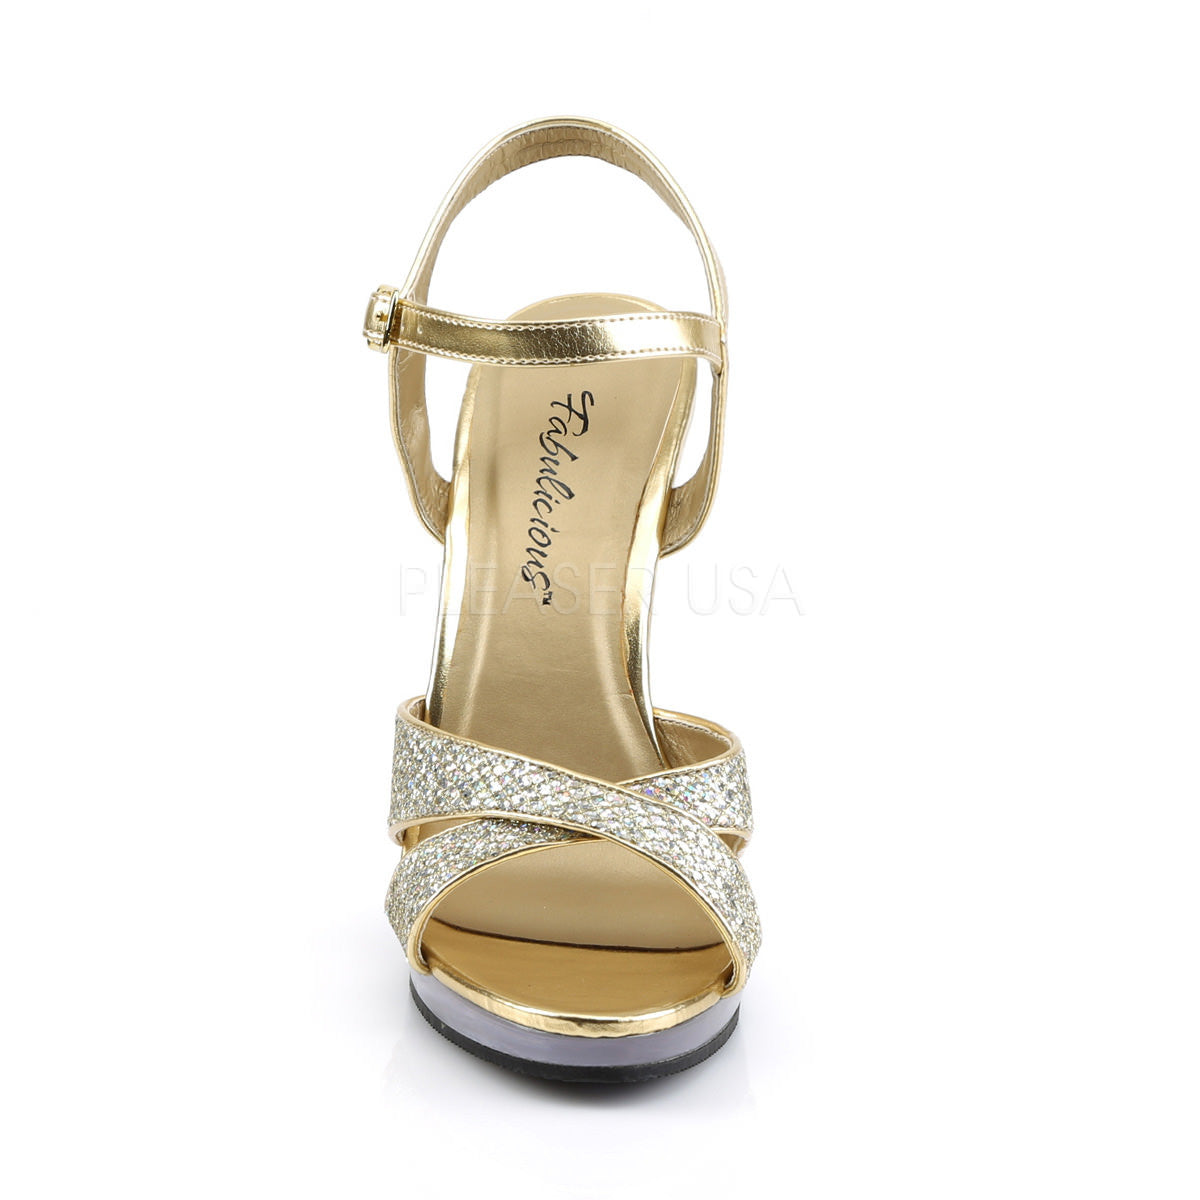 FABULICIOUS FLAIR-419(G) Gold Multi Glitter-Clear Ankle Strap Sandals